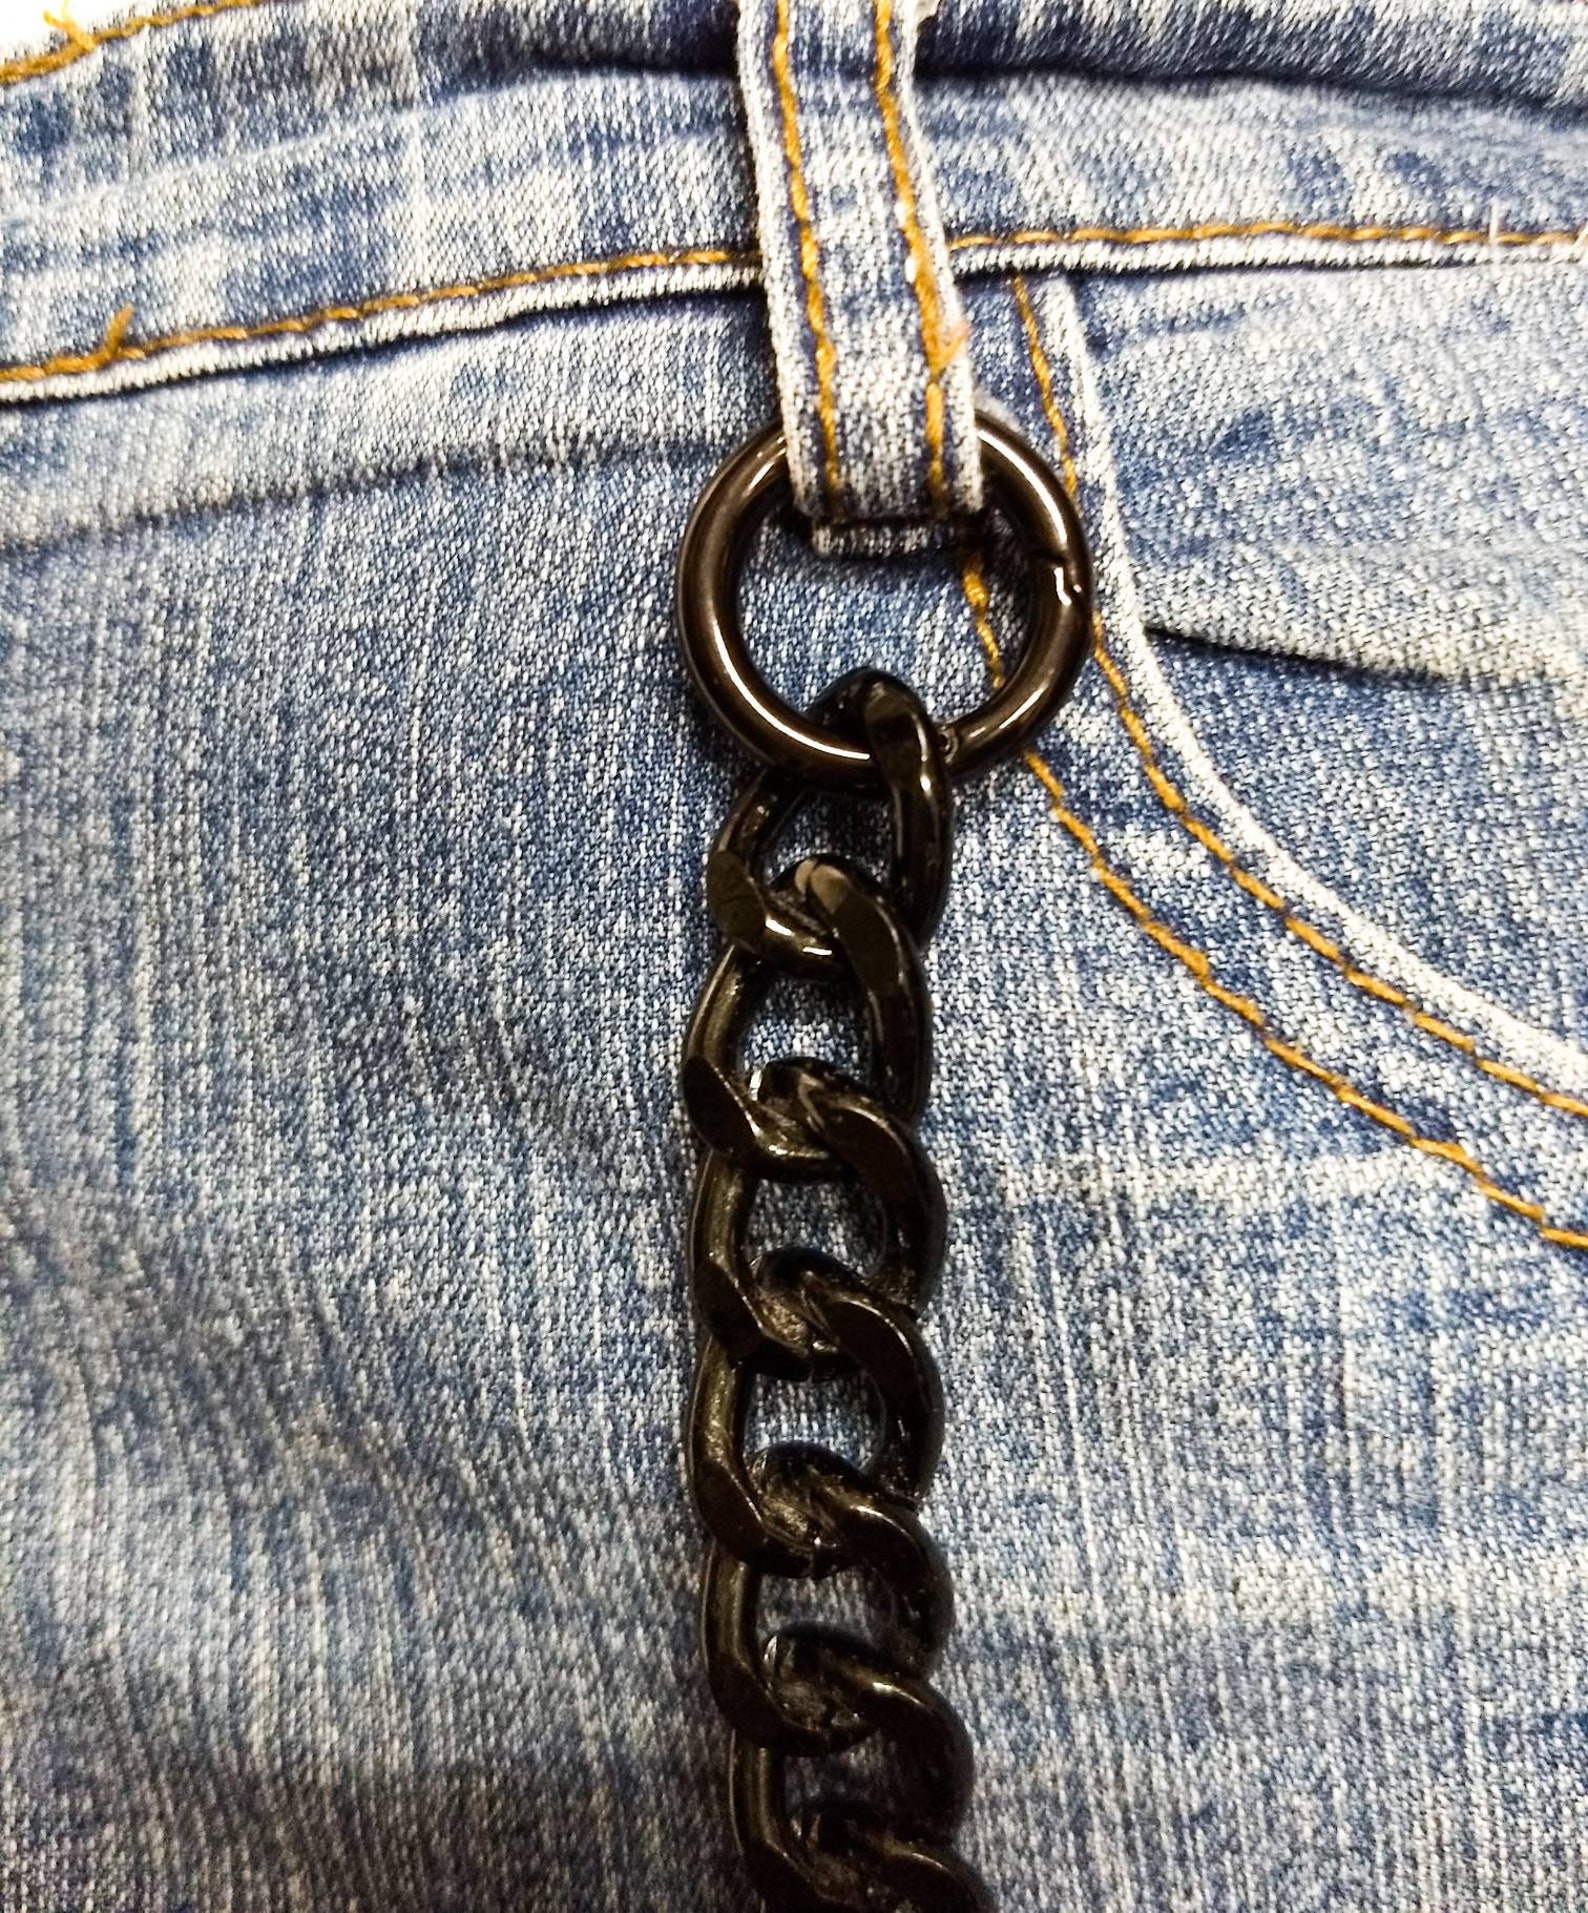 Black Wallet chain pants chain thick eboy chain for trouser | Etsy